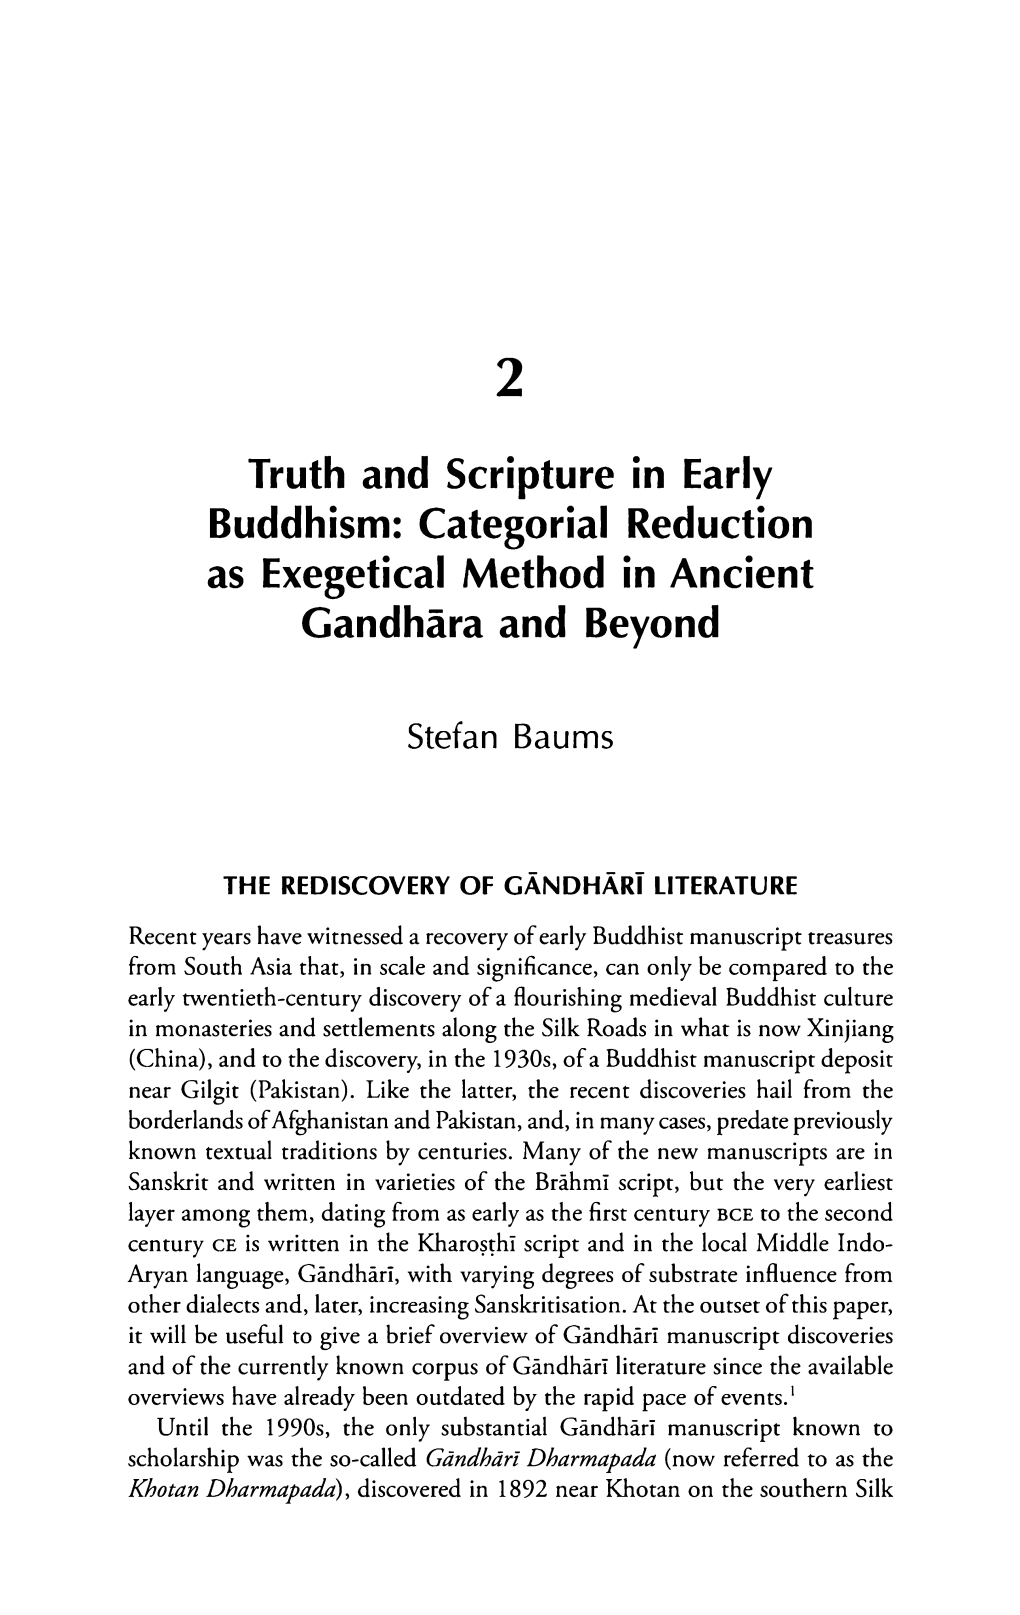 Truth and Scripture in Early Buddhism: Categorial Reduction As Exegetical Method in Ancient Gandhara and Beyond